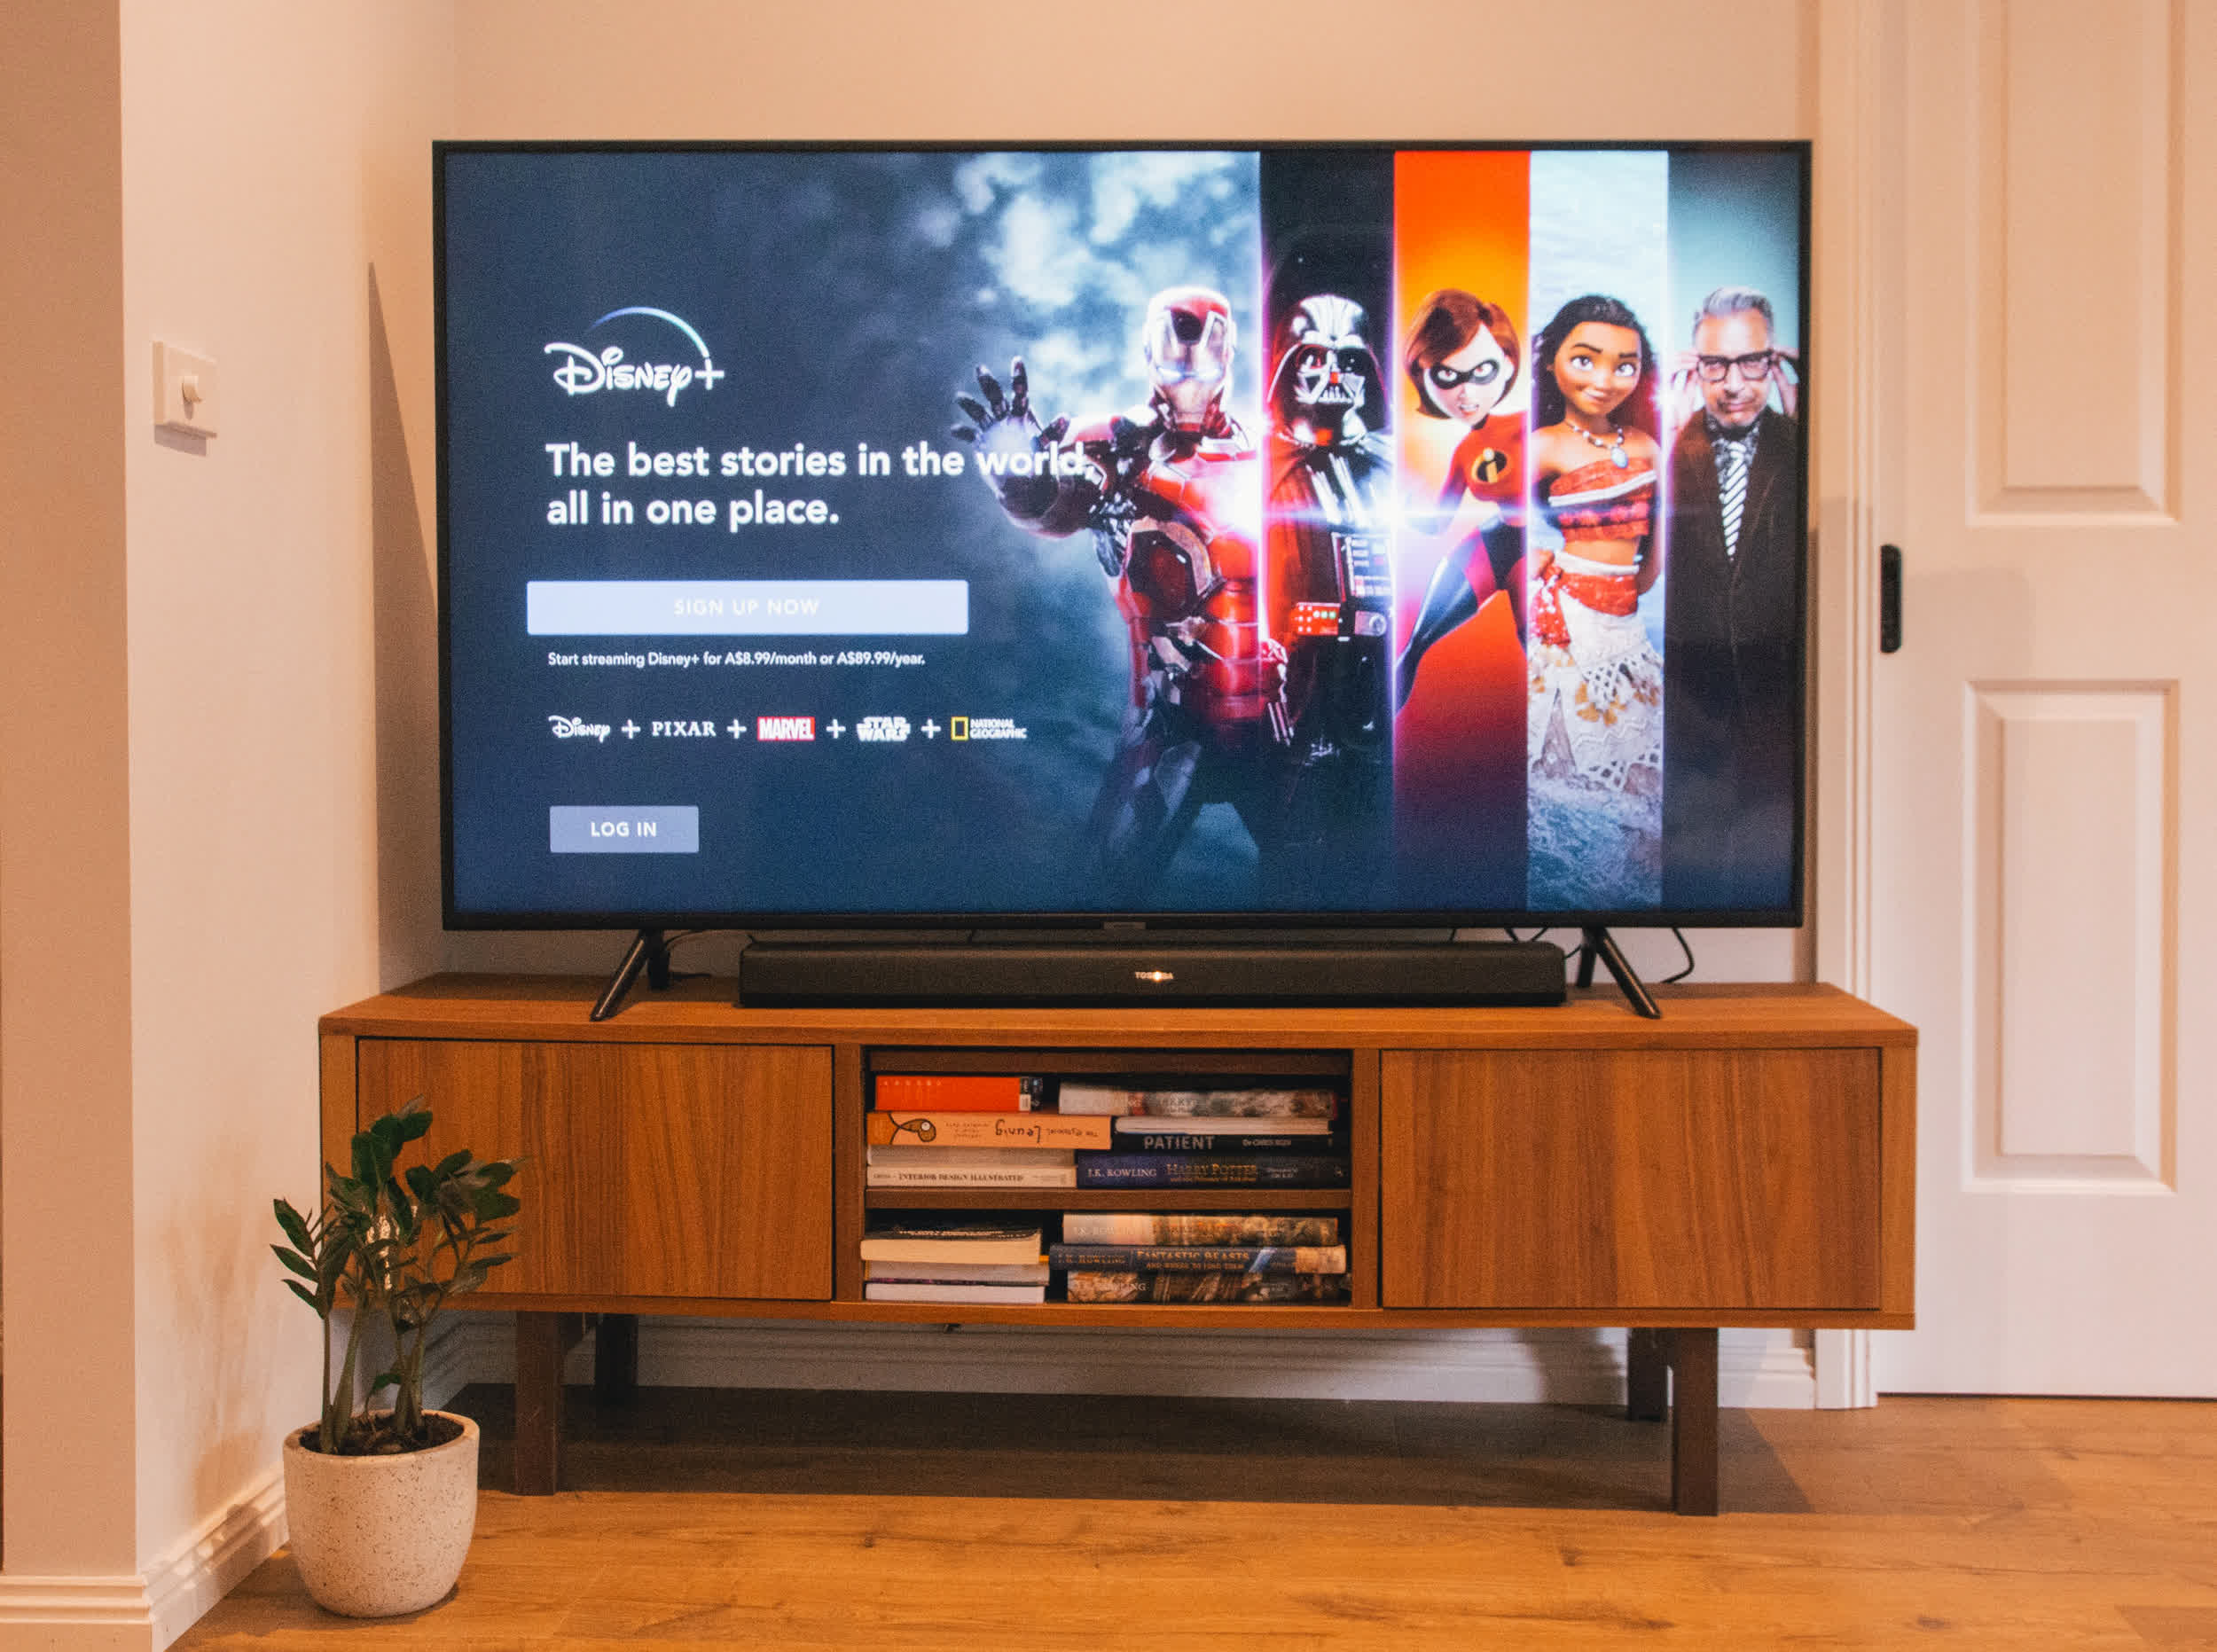 Disney+ is increasing its subscription price by 27%, will target password sharers